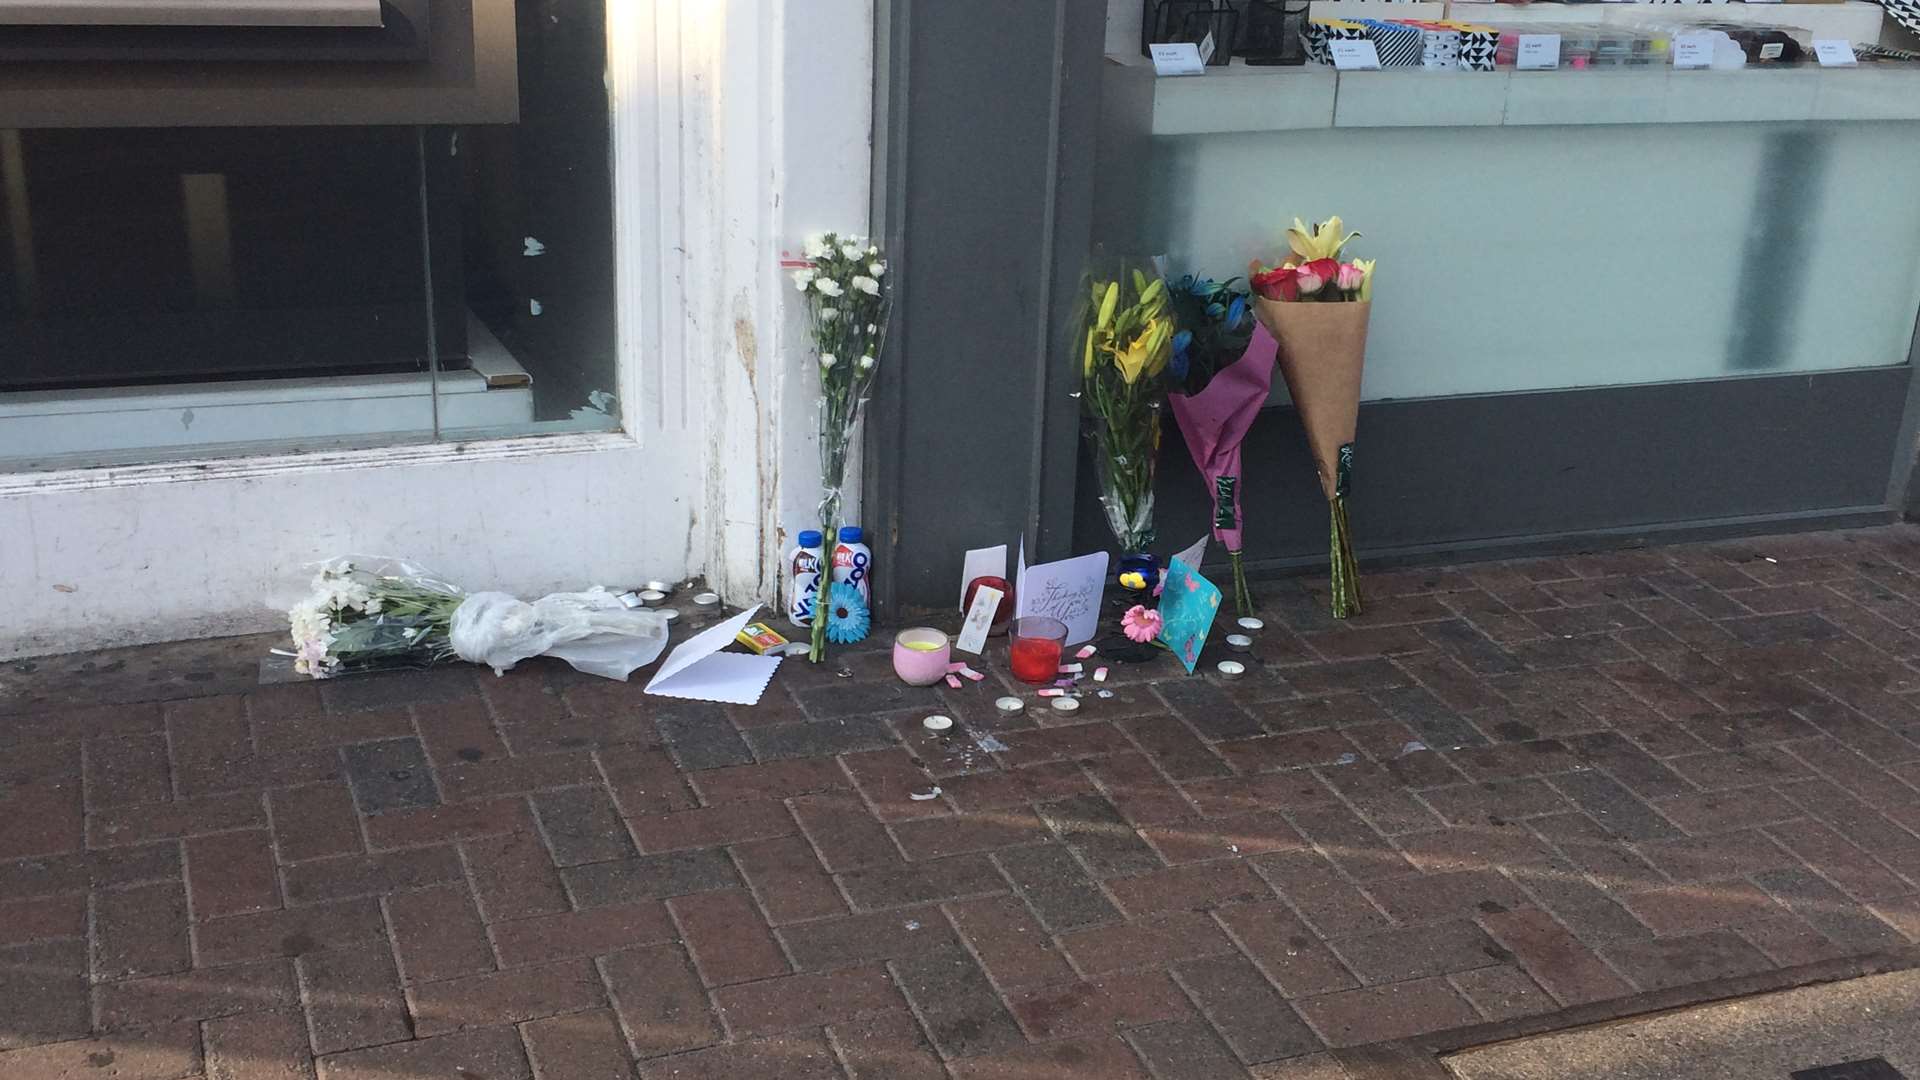 Floral tributes have been left in Week Street